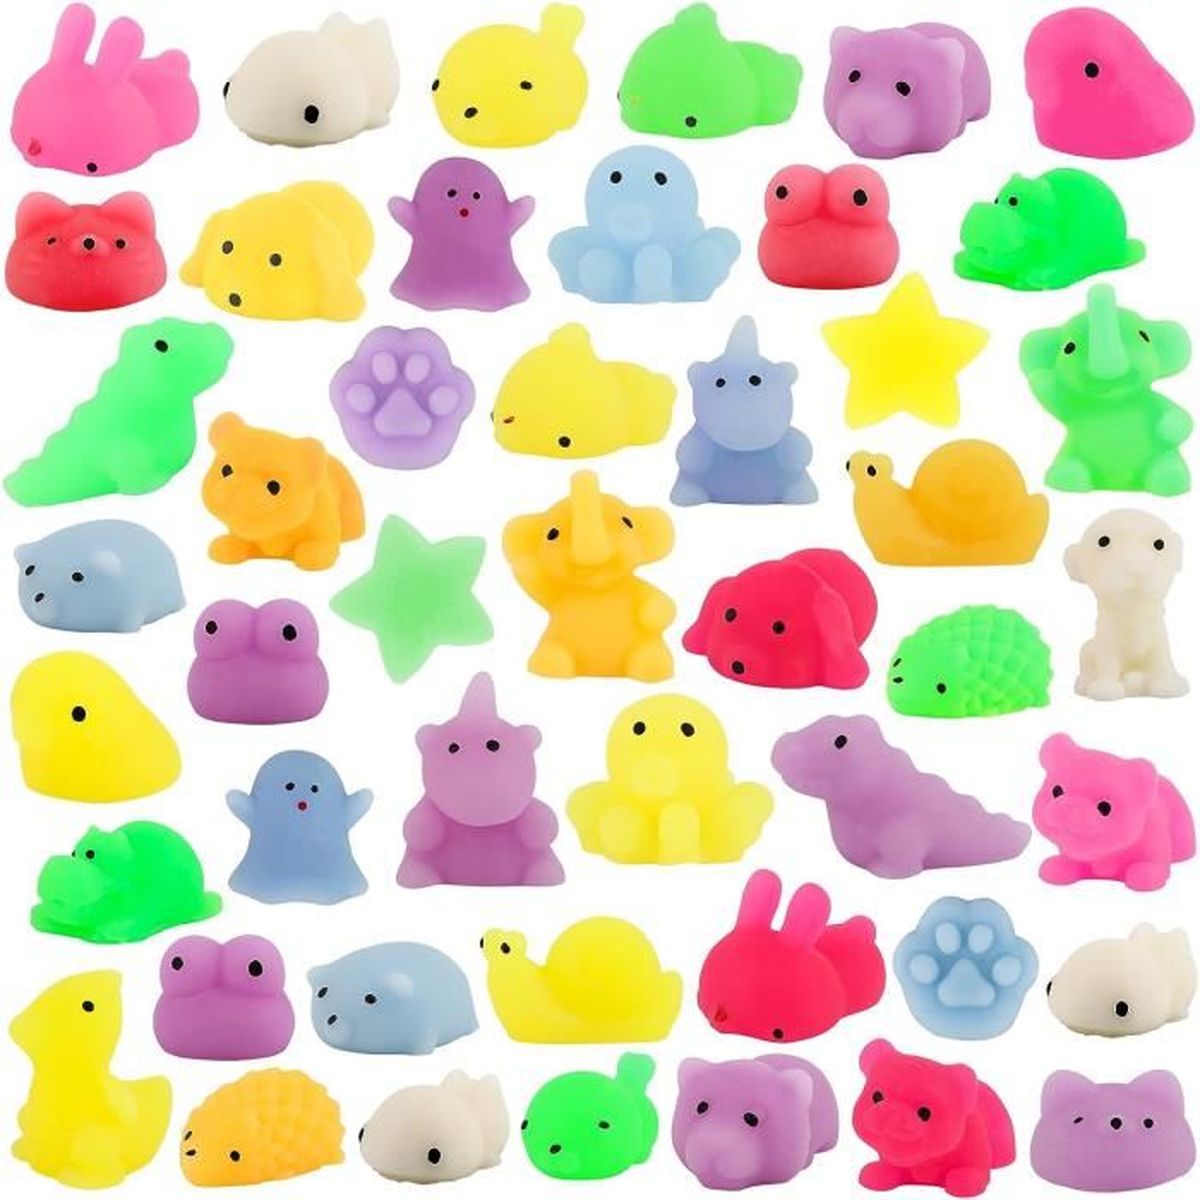 20pcs Jouets Squishes Lumineux Pour Enfants Kawaii Glow In The